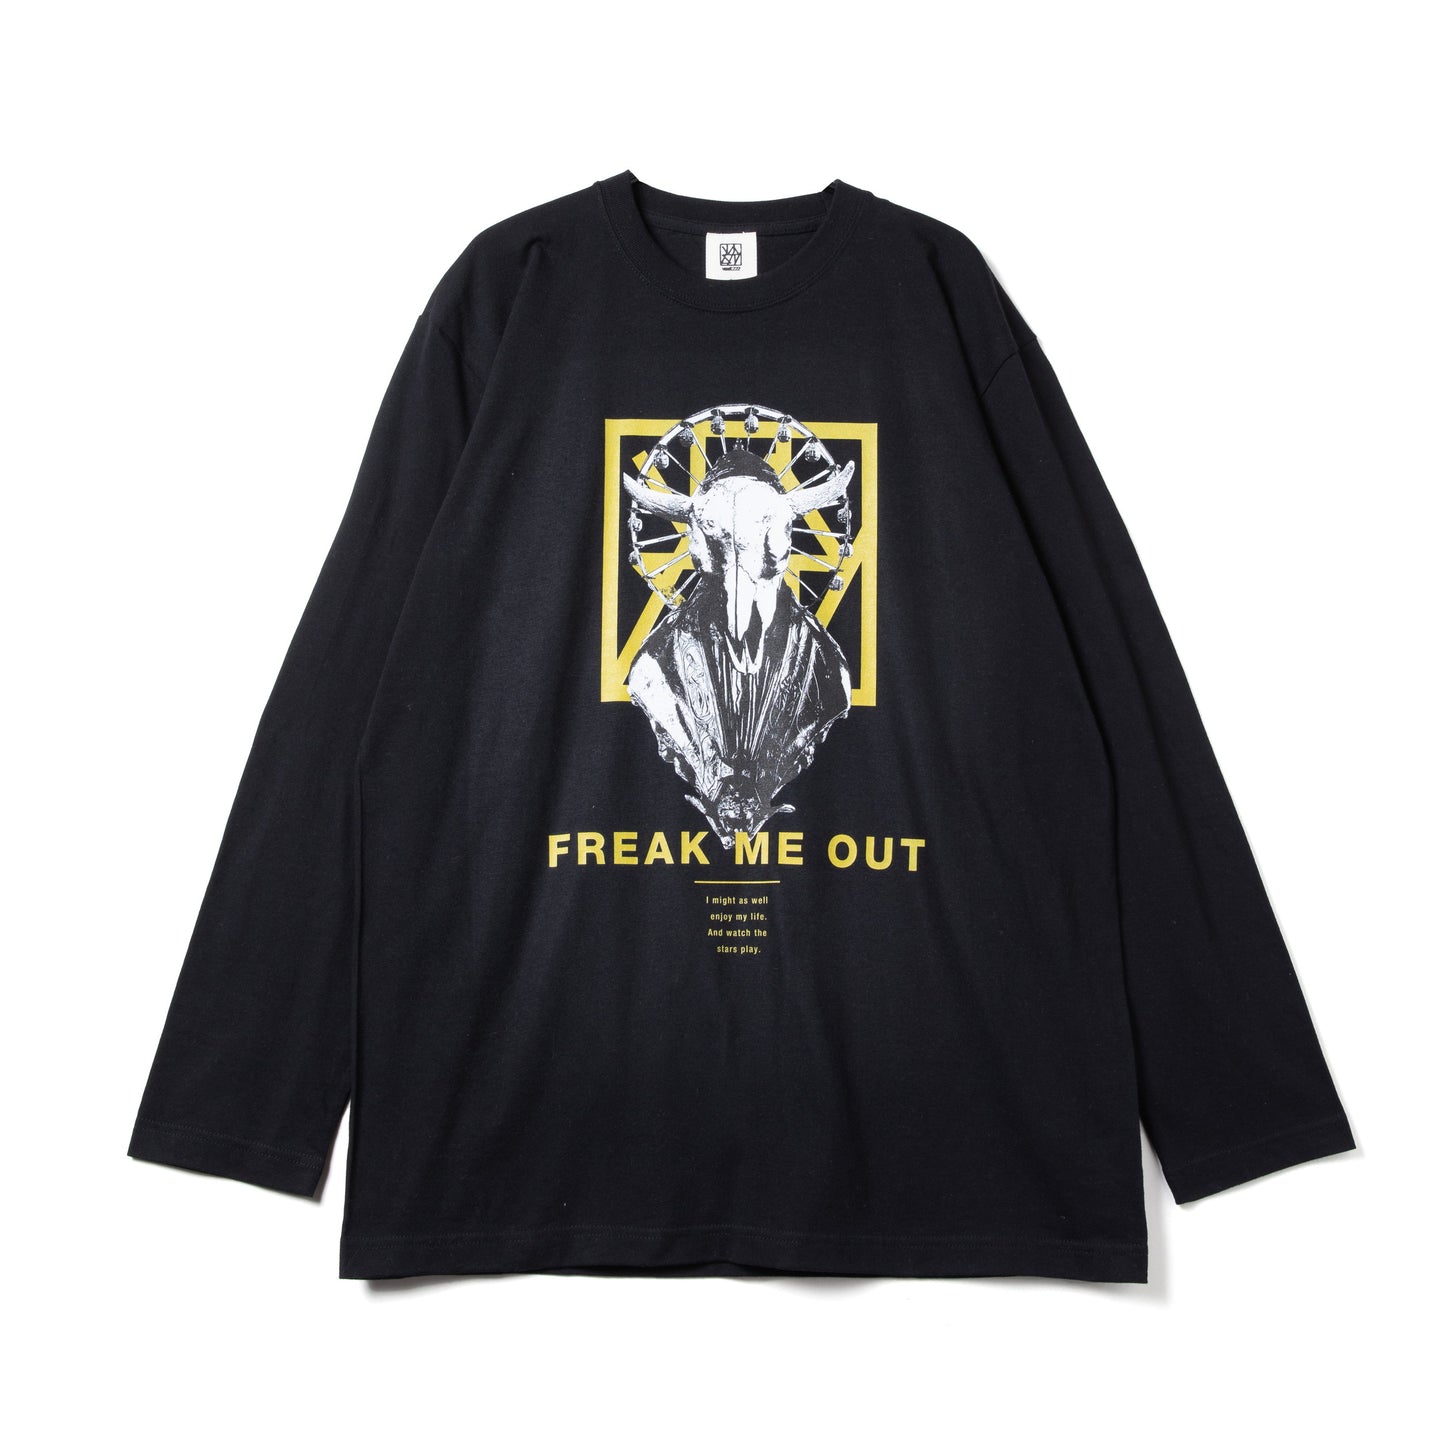 "REAK ME OUT" L/S TEE